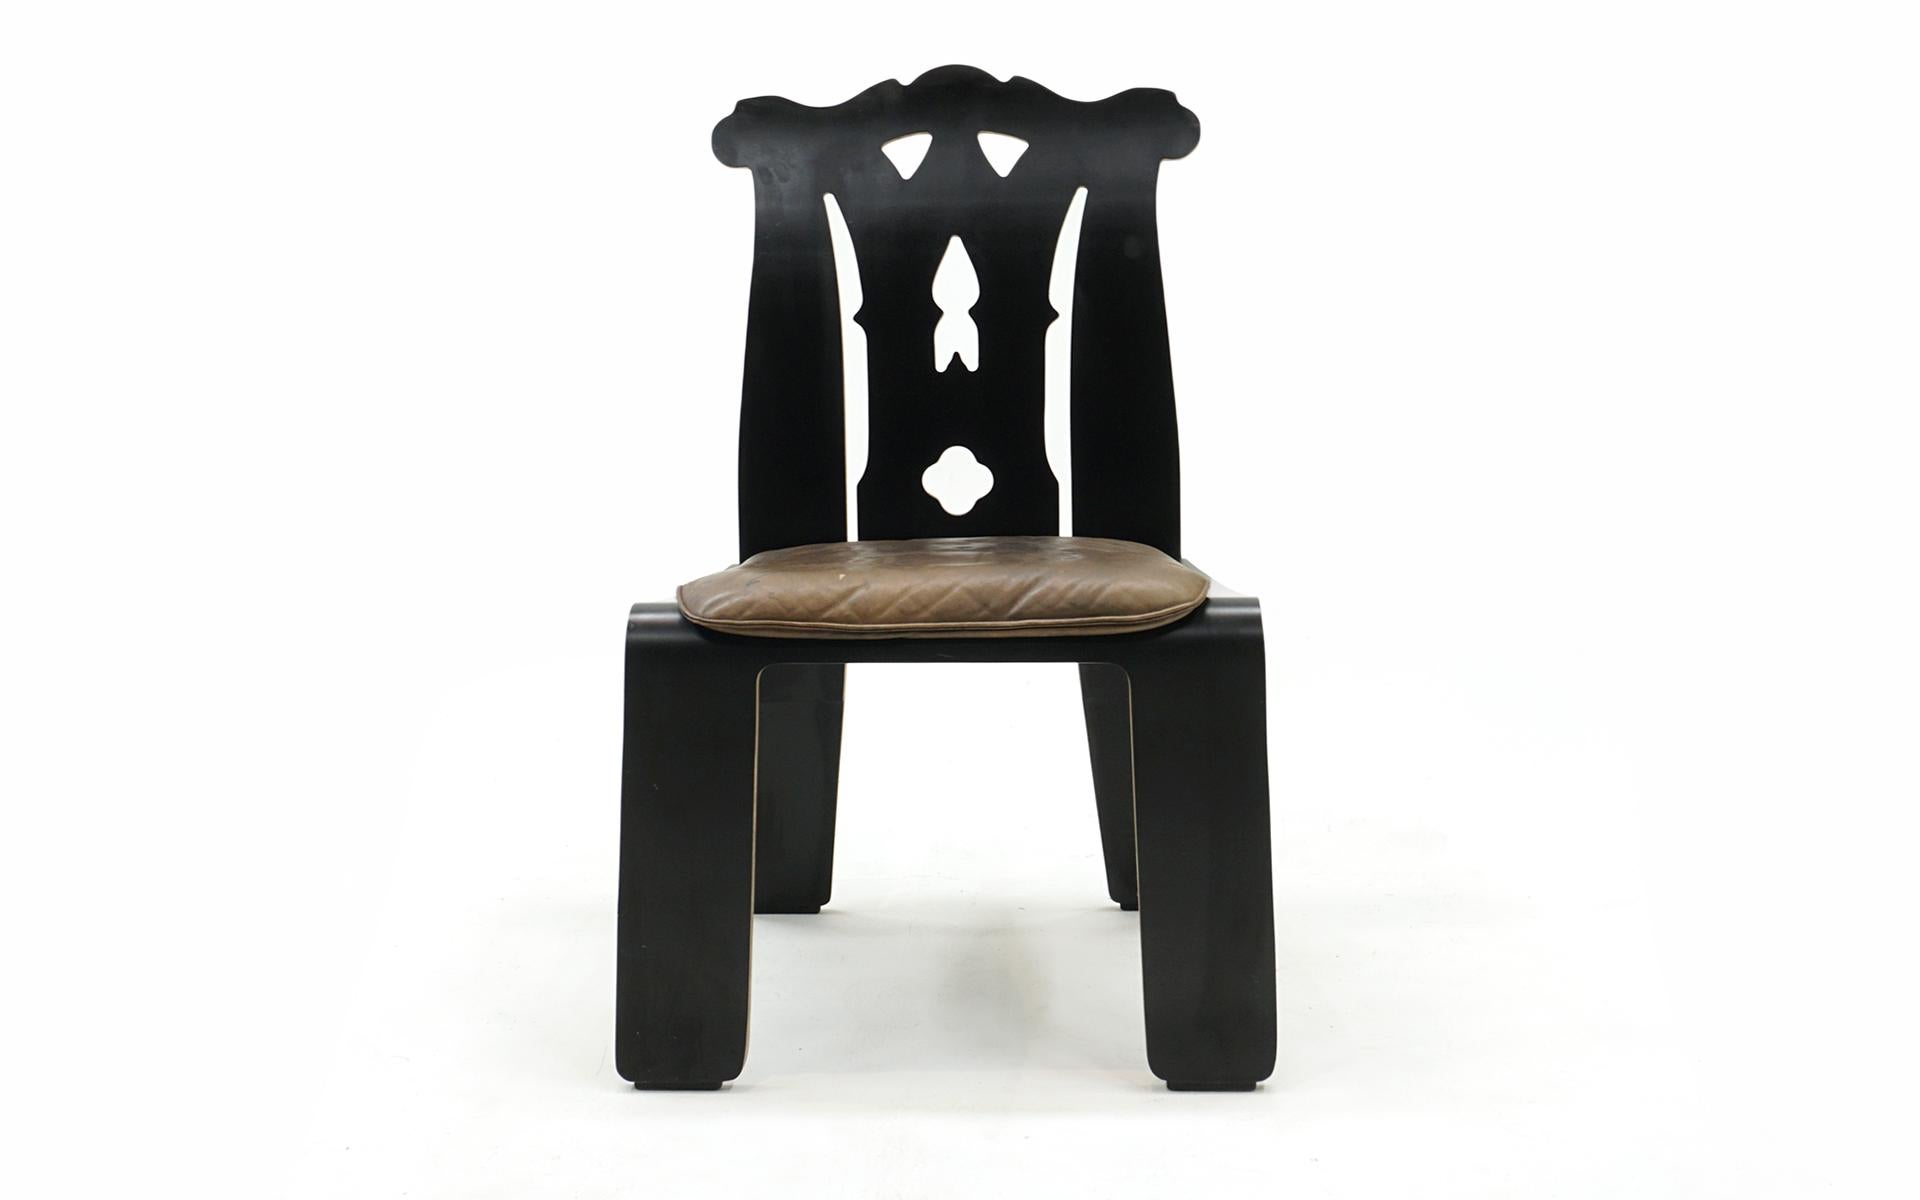 Chippendale Chair designed by Robert Venturi and Denise Scott Brown for Knoll, 1984.  This example retains the  original black finish and leather cushion.  The cushion shows fading and multiple impressions, but no tears, holes or repairs (also would